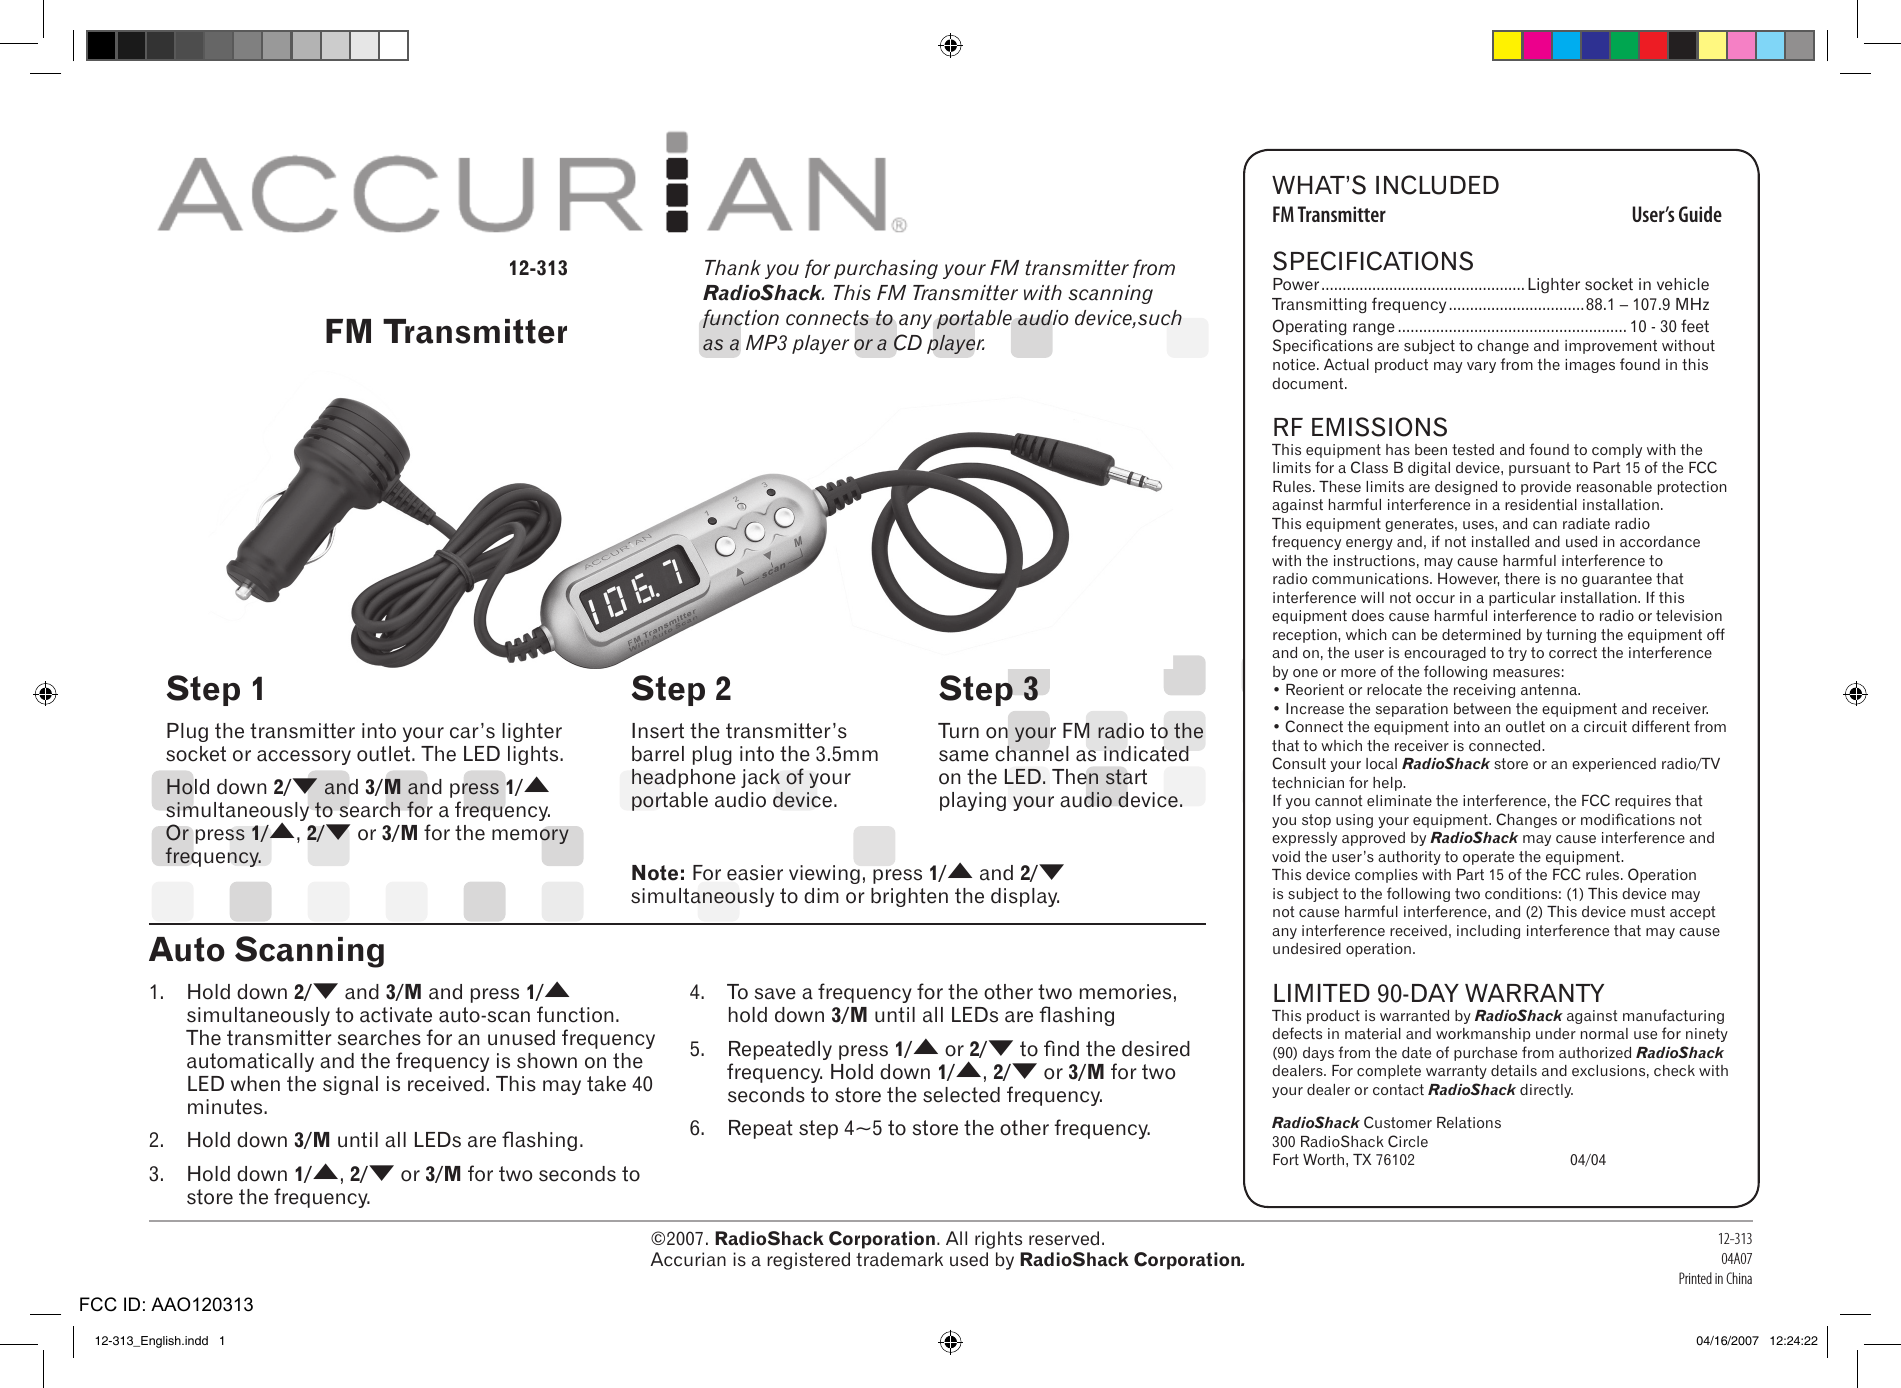 ©2007. RadioShack Corporation. All rights reserved.  Accurian is a registered trademark used by RadioShack Corporation.12-31304A07Printed in ChinaWHAT’S INCLUDEDFM Transmitter  User’s GuideSPECIFICATIONSPower ................................................ Lighter socket in vehicleTransmitting frequency ................................88.1 – 107.9 MHzOperating range ...................................................... 10 - 30 feet Specications are subject to change and improvement without notice. Actual product may vary from the images found in this document.RF EMISSIONSThis equipment has been tested and found to comply with the limits for a Class B digital device, pursuant to Part 15 of the FCC Rules. These limits are designed to provide reasonable protection against harmful interference in a residential installation. This equipment generates, uses, and can radiate radio frequency energy and, if not installed and used in accordance with the instructions, may cause harmful interference to radio communications. However, there is no guarantee that interference will not occur in a particular installation. If this equipment does cause harmful interference to radio or television reception, which can be determined by turning the equipment off and on, the user is encouraged to try to correct the interference by one or more of the following measures:• Reorient or relocate the receiving antenna.• Increase the separation between the equipment and receiver. • Connect the equipment into an outlet on a circuit different from that to which the receiver is connected. Consult your local RadioShack store or an experienced radio/TV technician for help.If you cannot eliminate the interference, the FCC requires that you stop using your equipment. Changes or modications not expressly approved by RadioShack may cause interference and void the user’s authority to operate the equipment.This device complies with Part 15 of the FCC rules. Operation is subject to the following two conditions: (1) This device may not cause harmful interference, and (2) This device must accept any interference received, including interference that may cause undesired operation.LIMITED 90-DAY WARRANTYThis product is warranted by RadioShack against manufacturing defects in material and workmanship under normal use for ninety (90) days from the date of purchase from authorized RadioShack dealers. For complete warranty details and exclusions, check with your dealer or contact RadioShack directly. RadioShack Customer Relations 300 RadioShack CircleFort Worth, TX 76102     04/0412-313FM TransmitterStep 1Plug the transmitter into your car’s lighter socket or accessory outlet. The LED lights.Hold down 2/( and 3/M and press 1/) simultaneously to search for a frequency. Or press 1/), 2/( or 3/M for the memory frequency.Step 2Insert the transmitter’s barrel plug into the 3.5mm headphone jack of your portable audio device.Step 3Turn on your FM radio to the same channel as indicated on the LED. Then start playing your audio device.Thank you for purchasing your FM transmitter from RadioShack. This FM Transmitter with scanning function connects to any portable audio device,such as a MP3 player or a CD player. 1.  Hold down 2/( and 3/M and press 1/) simultaneously to activate auto-scan function. The transmitter searches for an unused frequency automatically and the frequency is shown on the LED when the signal is received. This may take 40 minutes.2.  Hold down 3/M until all LEDs are ashing.3.  Hold down 1/), 2/( or 3/M for two seconds to store the frequency.4.  To save a frequency for the other two memories, hold down 3/M until all LEDs are ashing5.  Repeatedly press 1/) or 2/( to nd the desired frequency. Hold down 1/), 2/( or 3/M for two seconds to store the selected frequency.6.  Repeat step 4~5 to store the other frequency.Auto ScanningNote: For easier viewing, press 1/) and 2/( simultaneously to dim or brighten the display. 12-313_English.indd   1 04/16/2007   12:24:22FCC ID: AAO120313